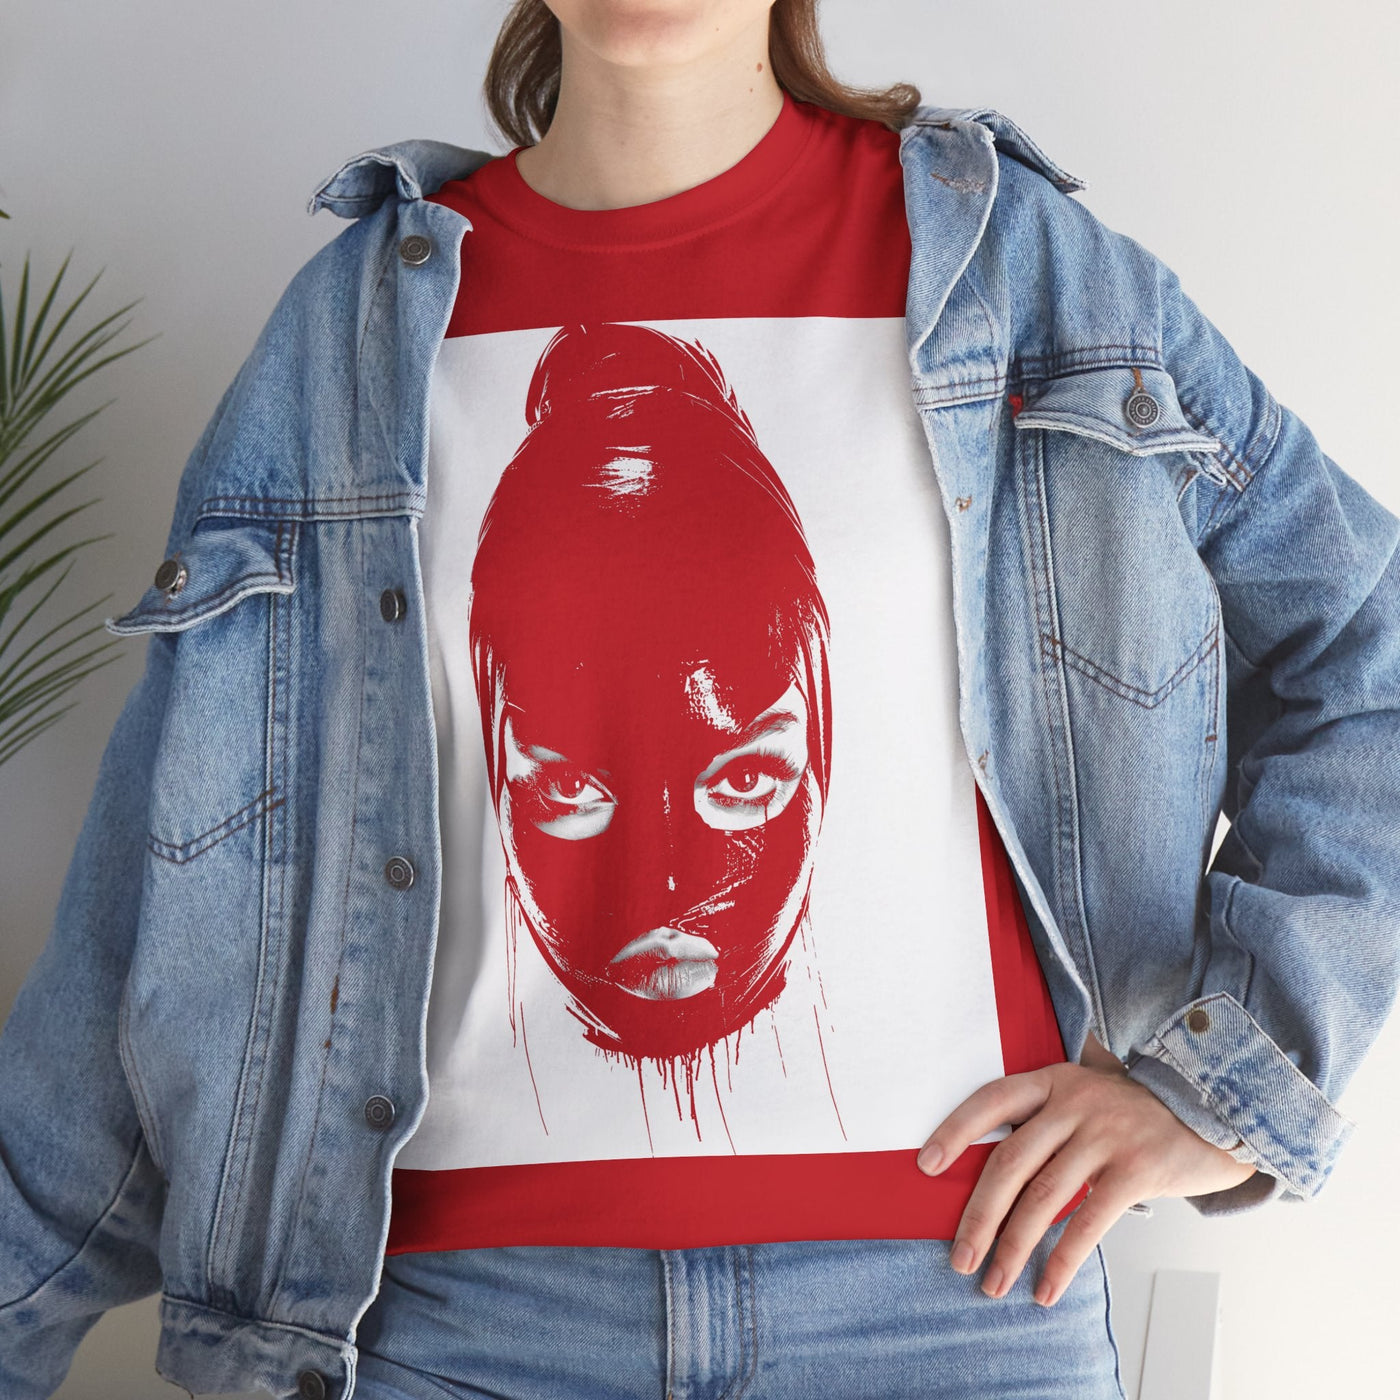 Head of Wicked Girl with Latex Hood T-Shirt